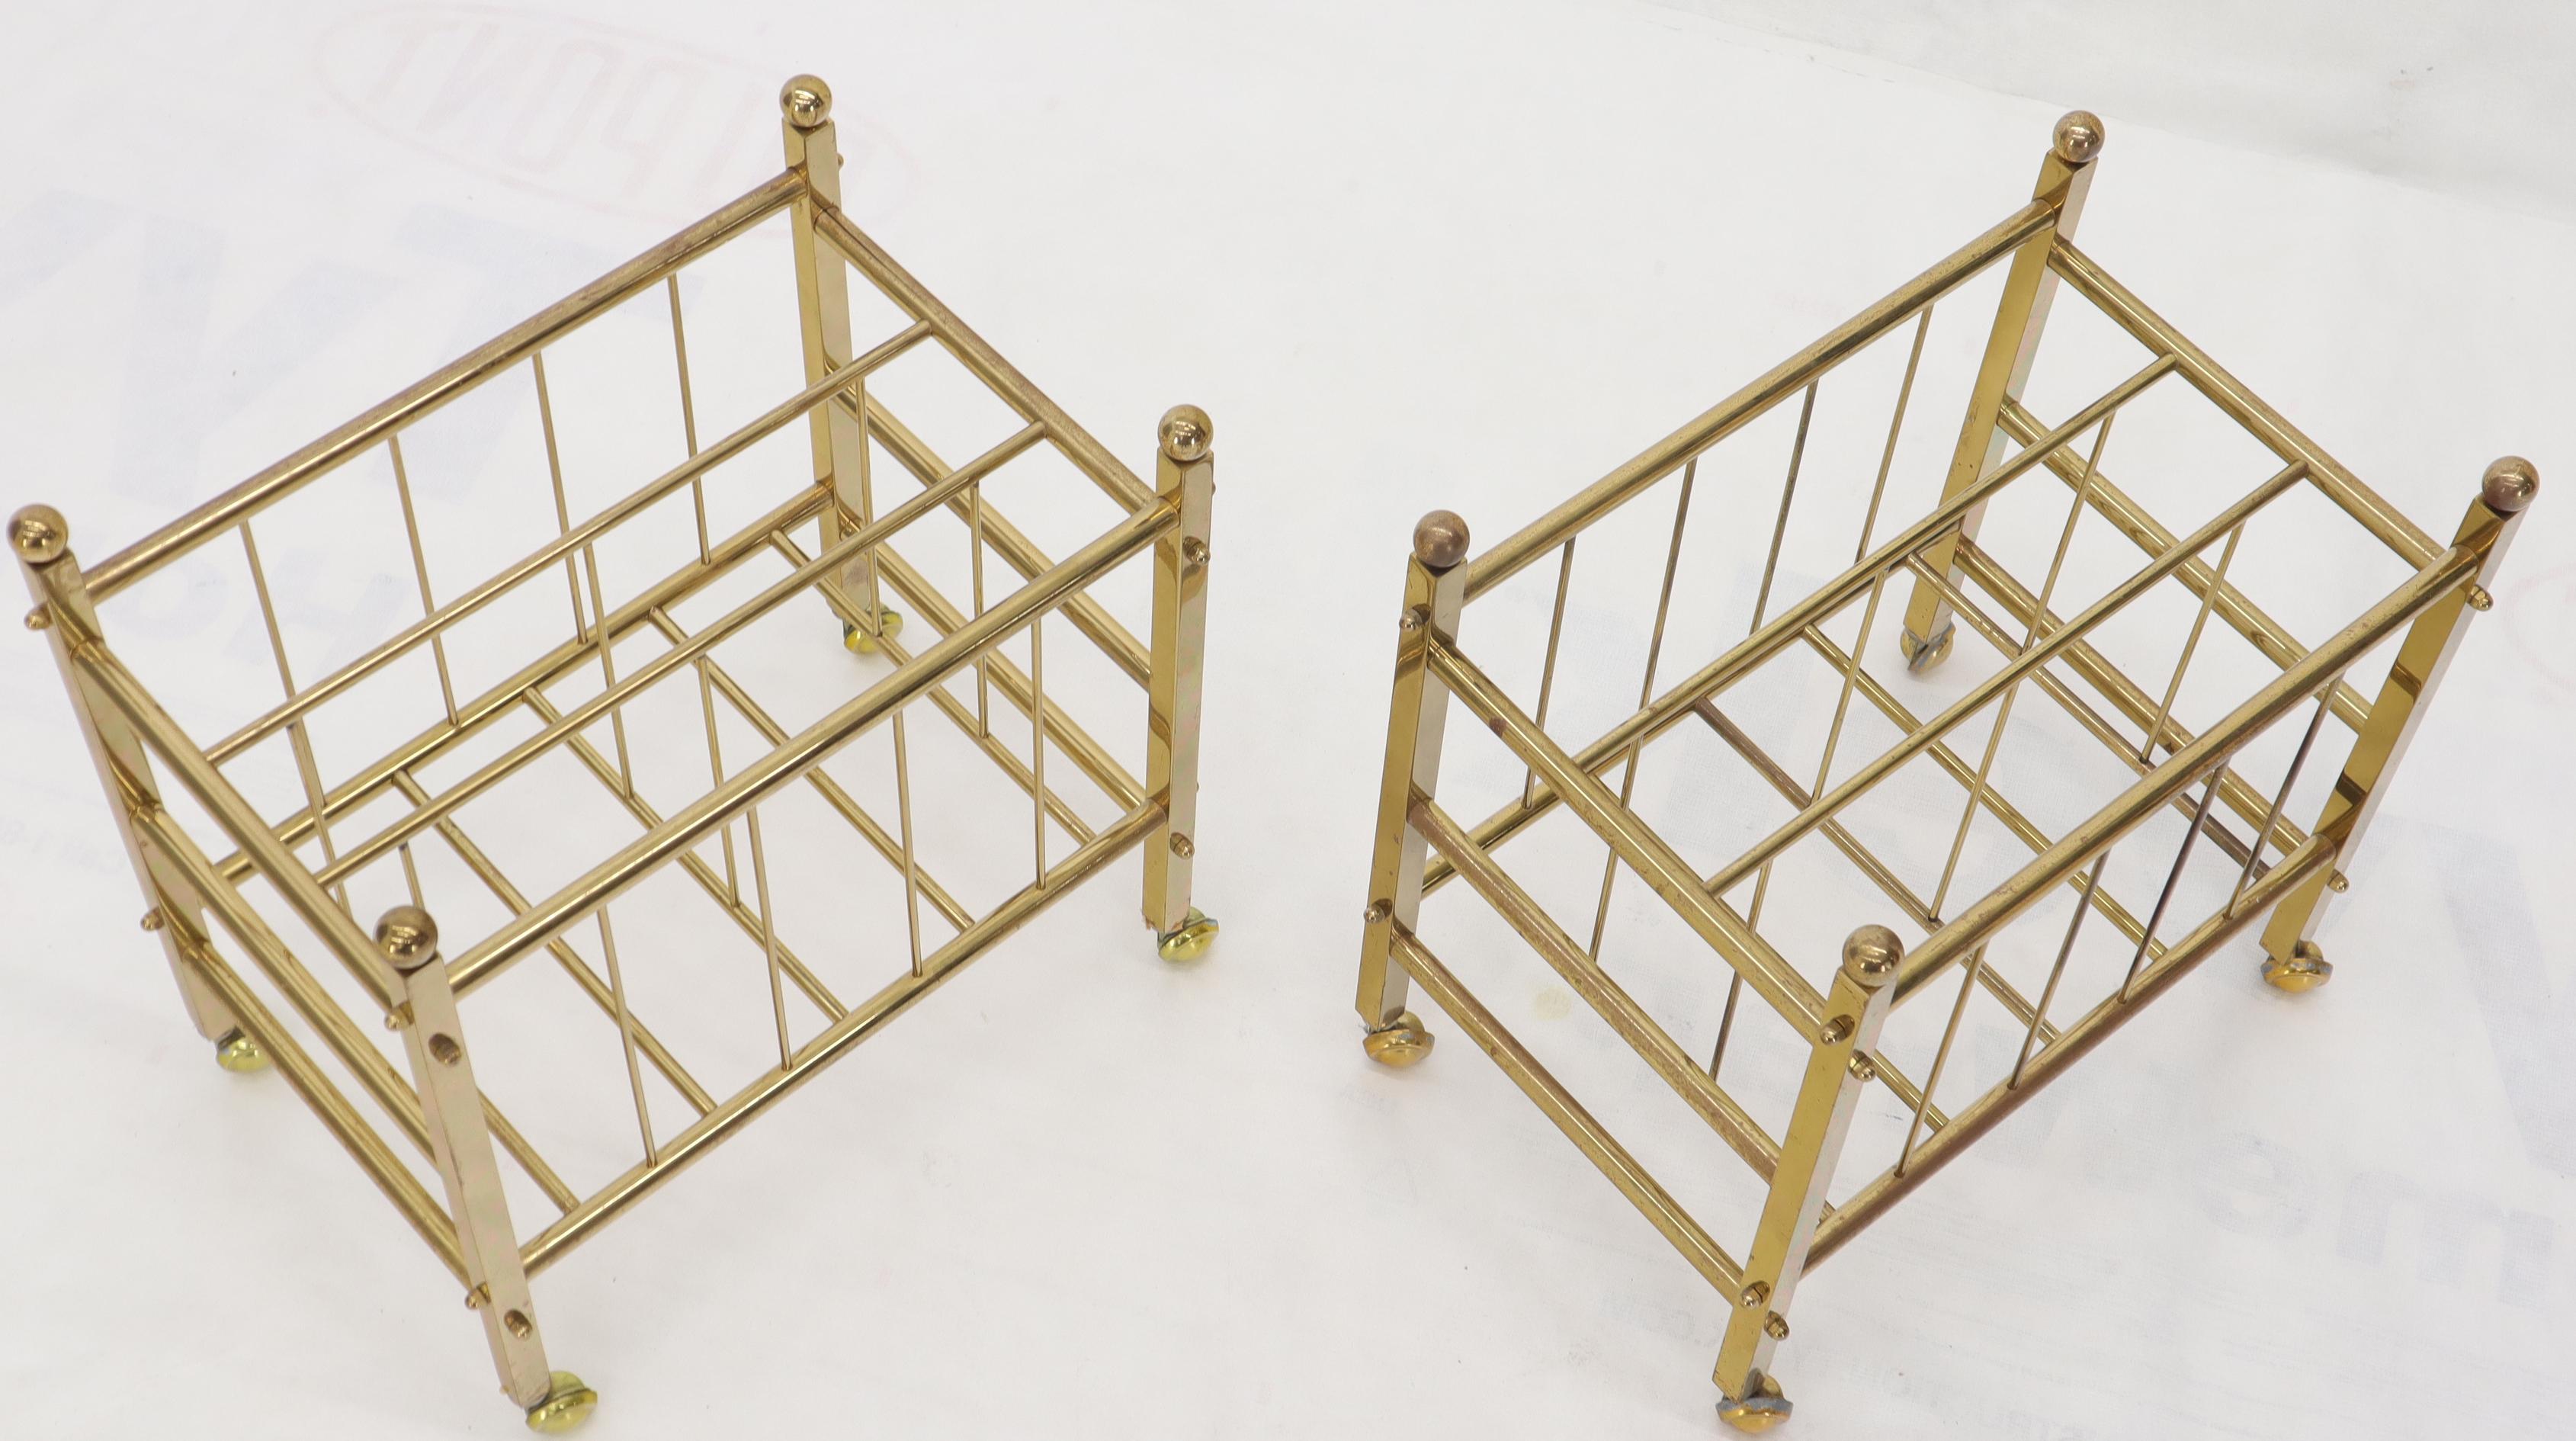 Pair of Mid-Century Modern Polished Brass Magazine Racks on Metal Casters In Good Condition For Sale In Rockaway, NJ